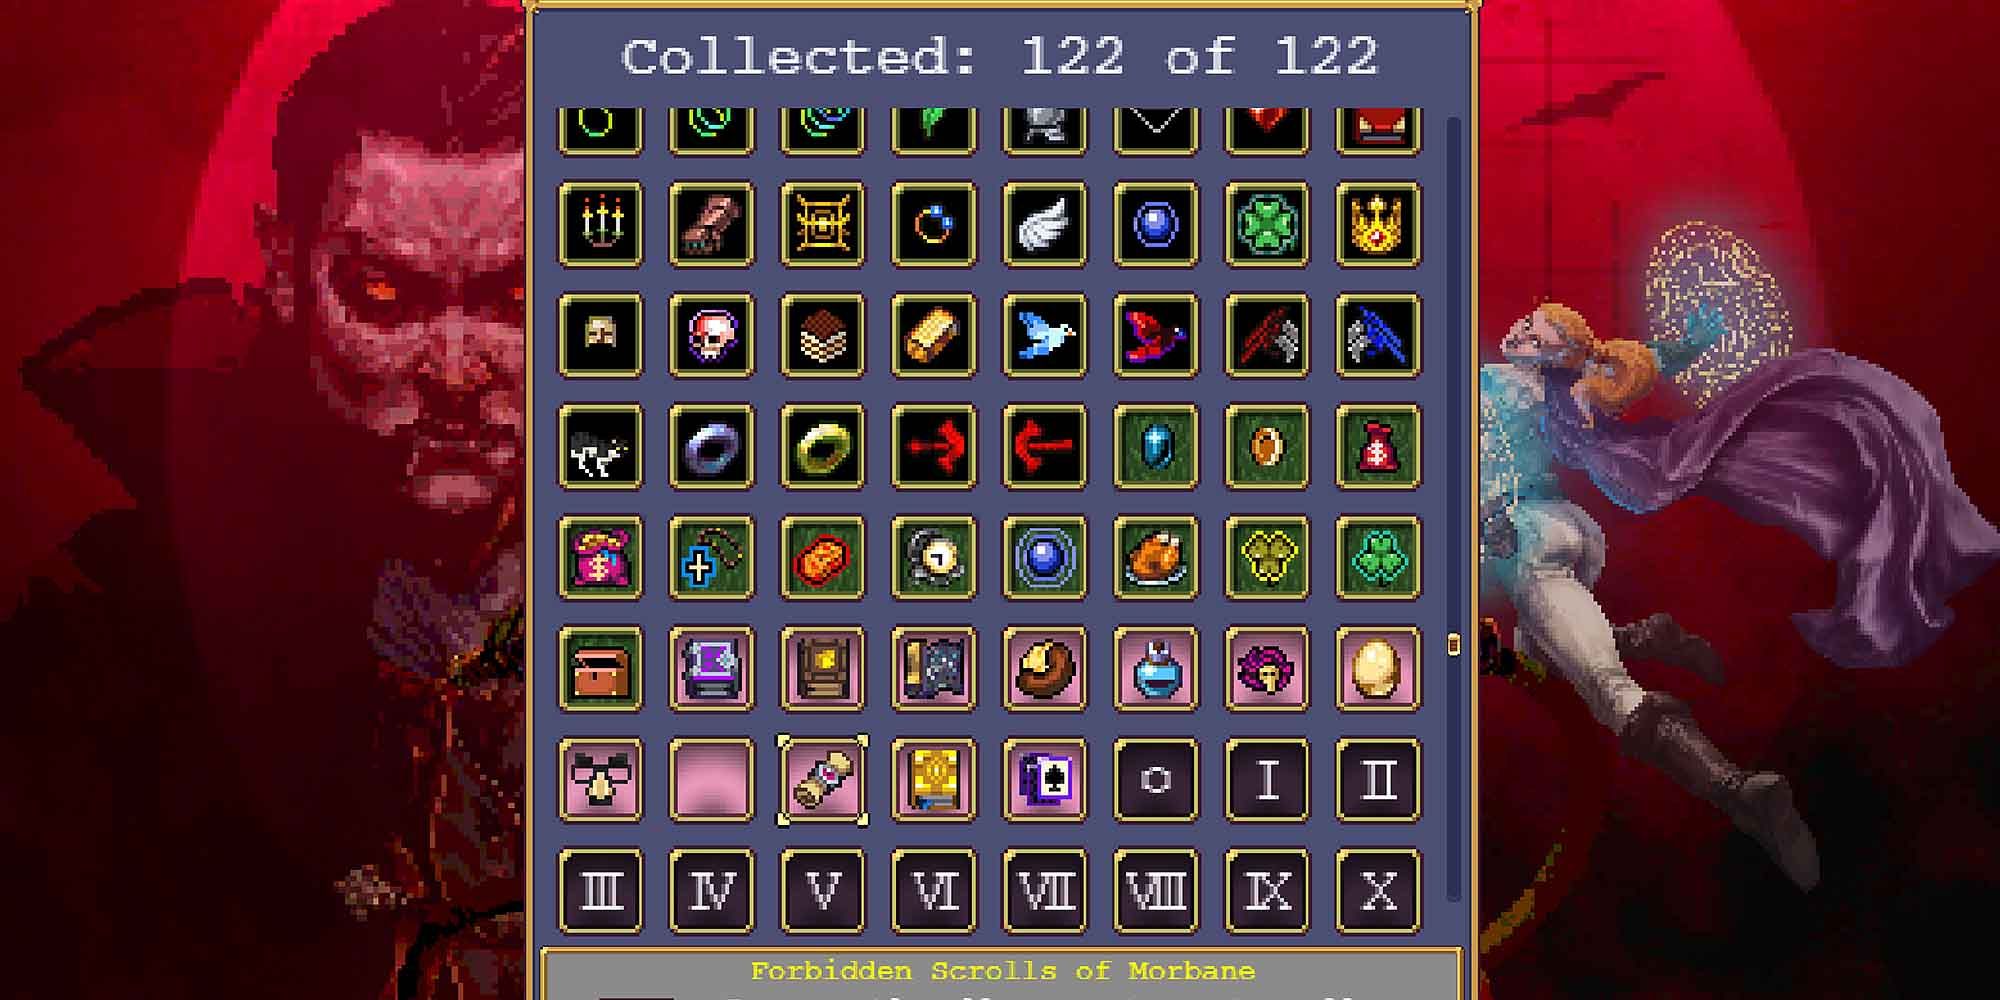 The Collection in Vampire Survivors